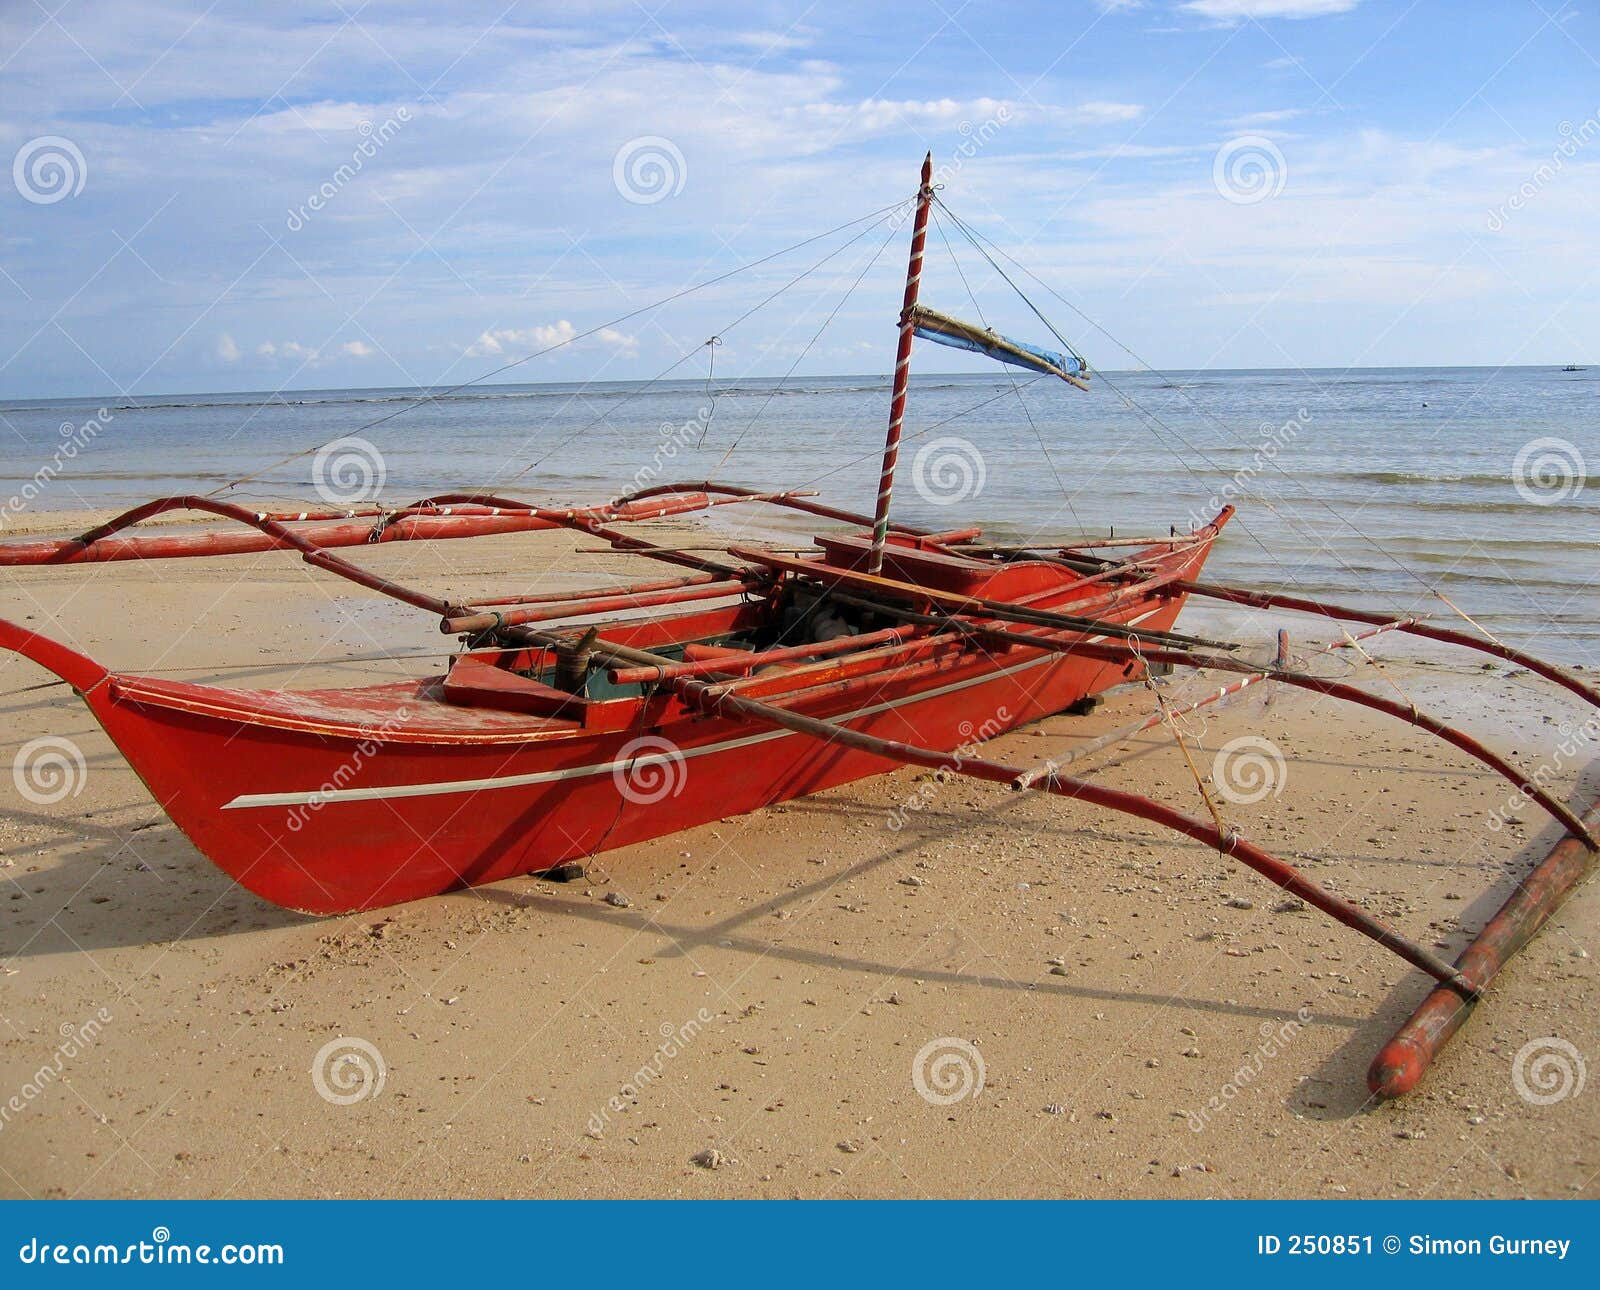 Small red Banca traditional outrigger fishing boat on the beach negros 